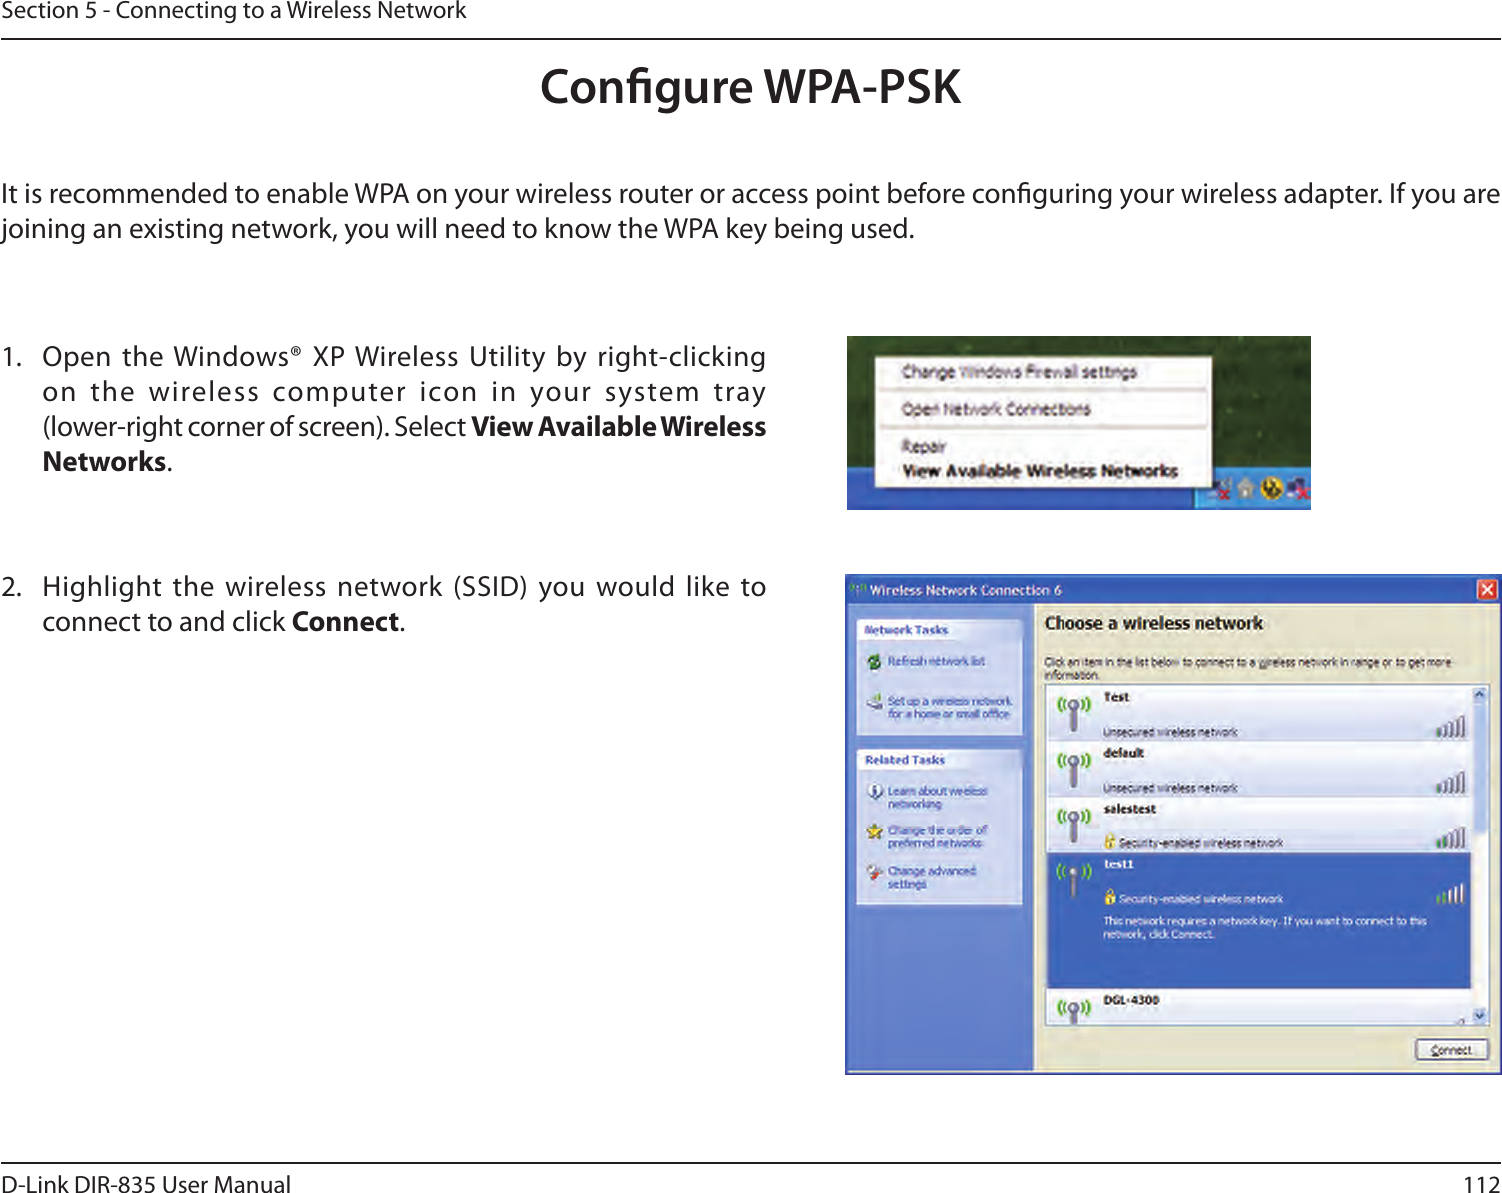 112D-Link DIR-835 User ManualSection 5 - Connecting to a Wireless NetworkCongure WPA-PSKIt is recommended to enable WPA on your wireless router or access point before conguring your wireless adapter. If you are joining an existing network, you will need to know the WPA key being used.2.  Highlight the  wireless network (SSID) you would like  to connect to and click Connect.1.  Open the Windows® XP Wireless Utility  by right-clicking on  the  wireless  computer  icon  in  your  system  tray  (lower-right corner of screen). Select View Available Wireless Networks. 